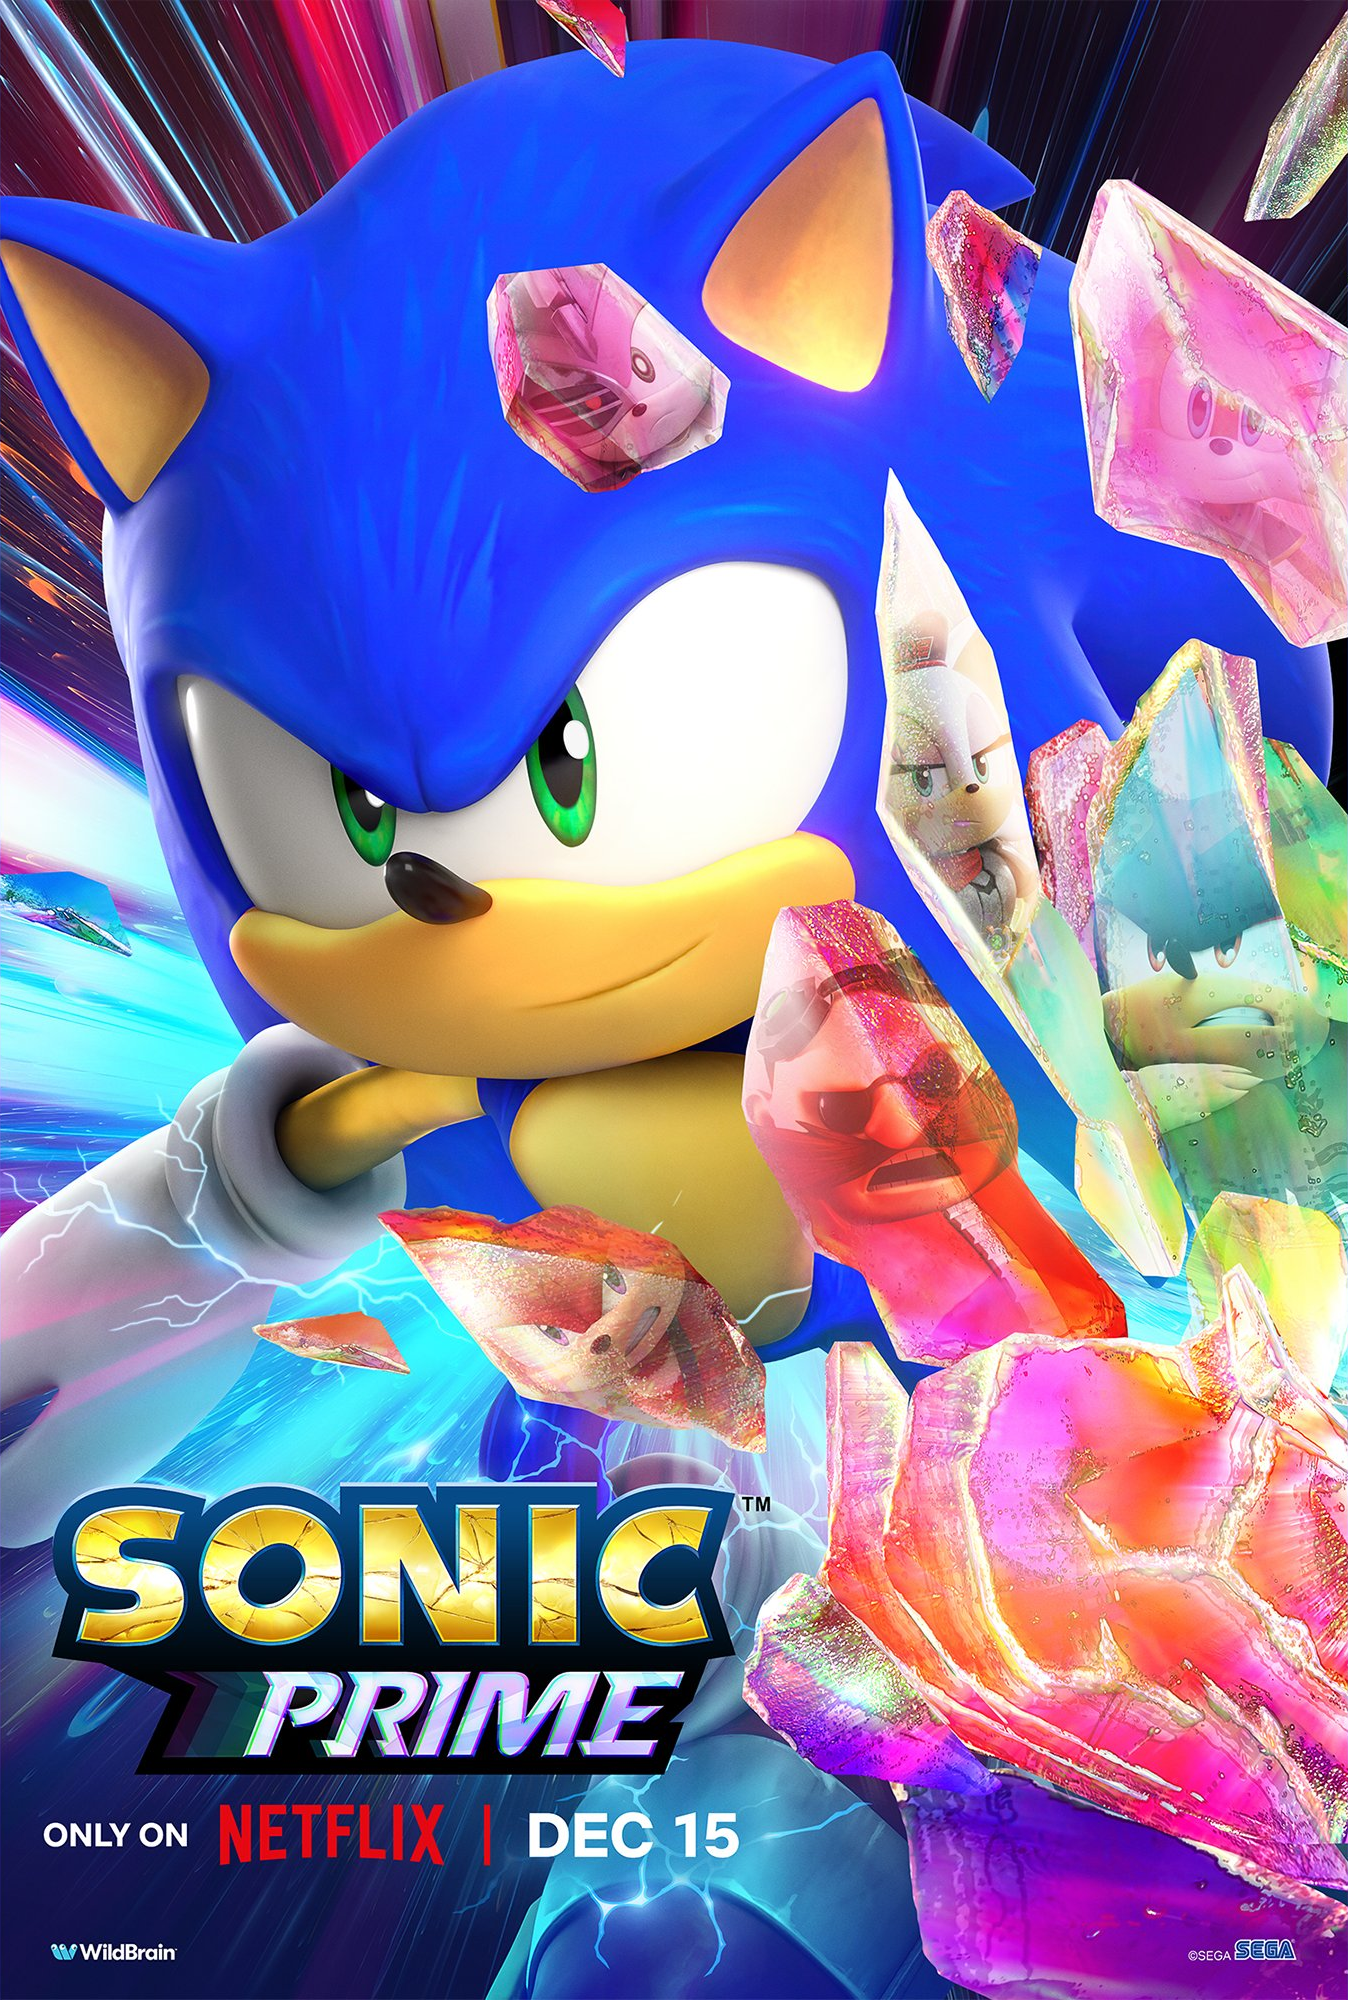 Sonic Prime Coming December 15th, 2022